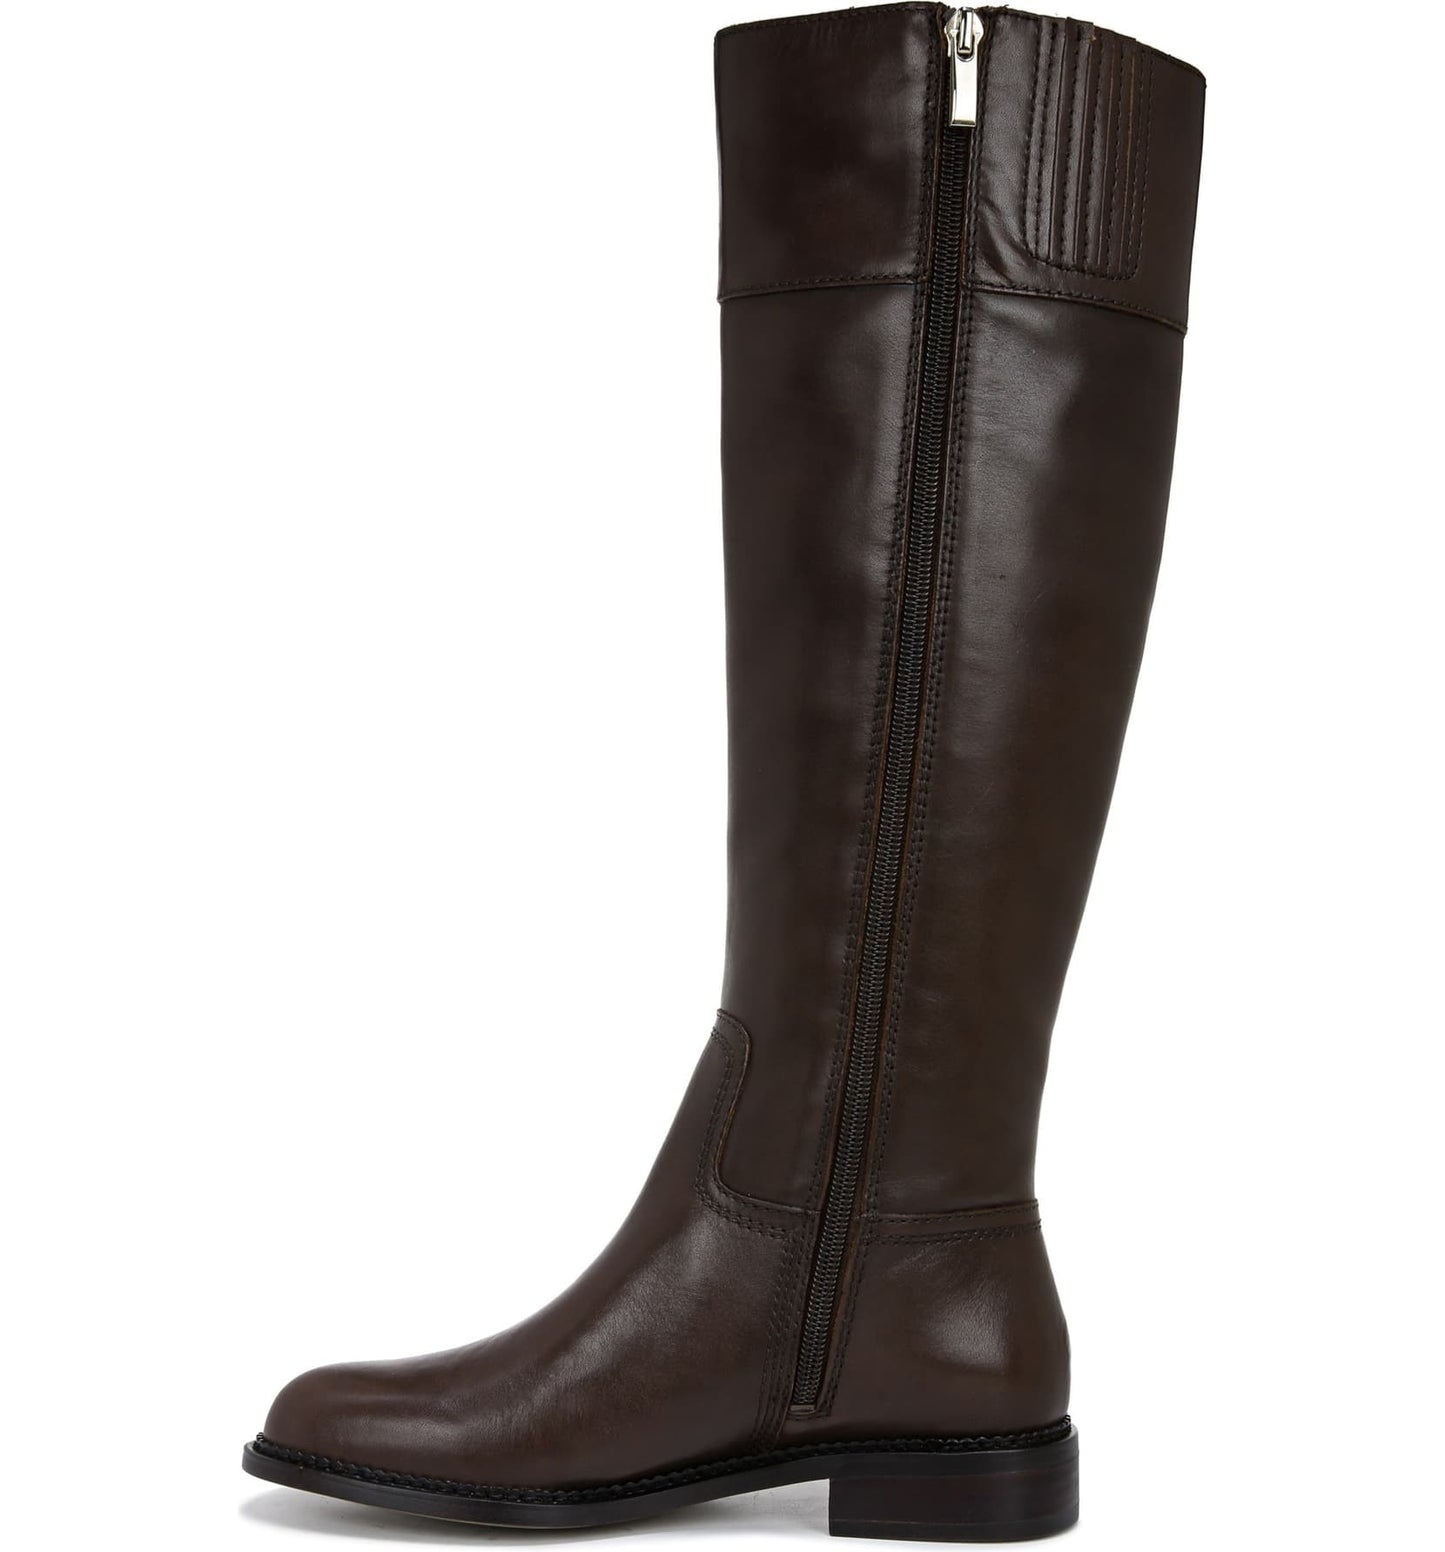 Hudson WC Brown Leather Franco Sarto Wide Calf Boots